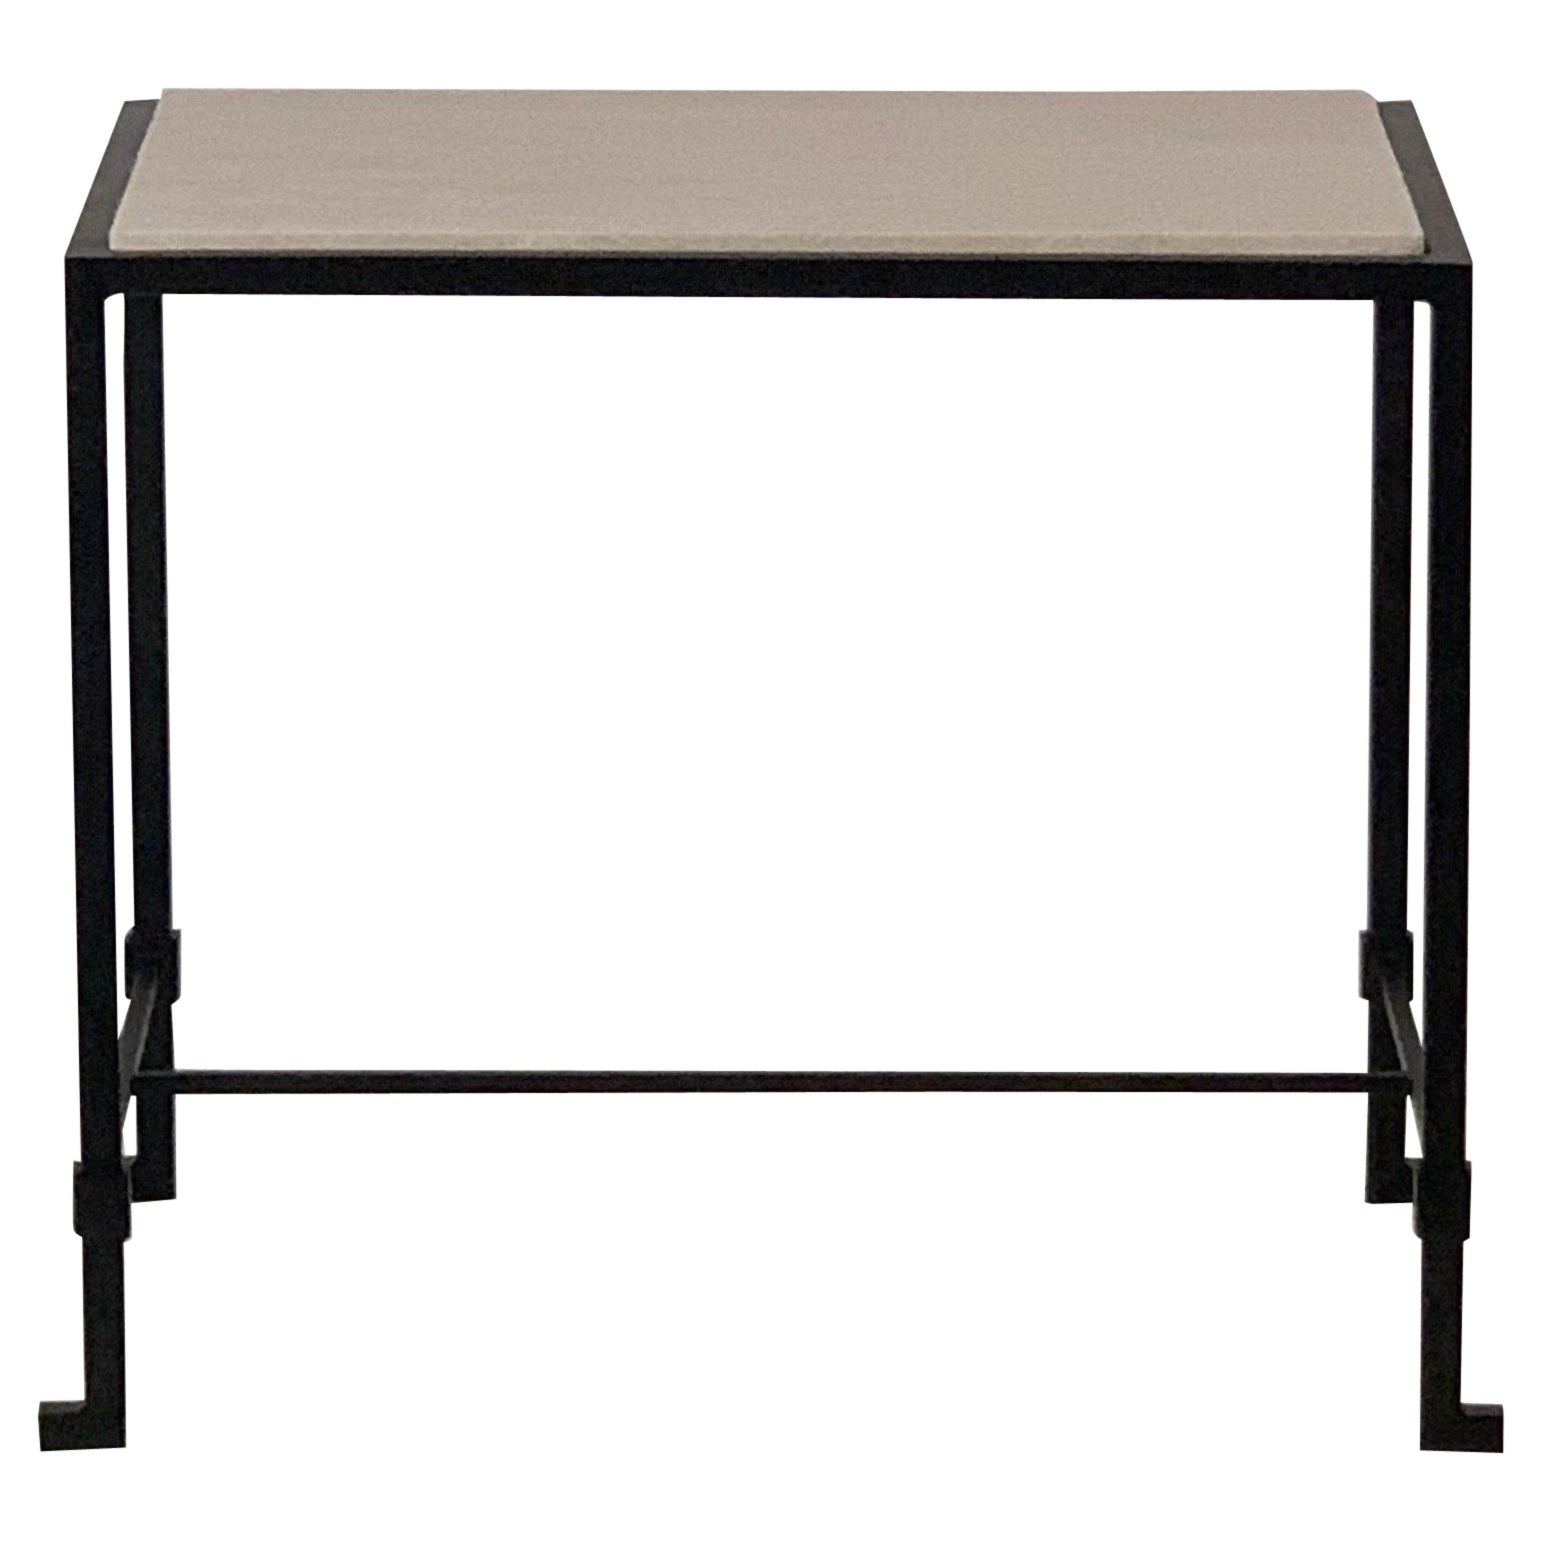 'Diagramme' Blackened Iron and Travertine Side or End Table by Design Frères For Sale